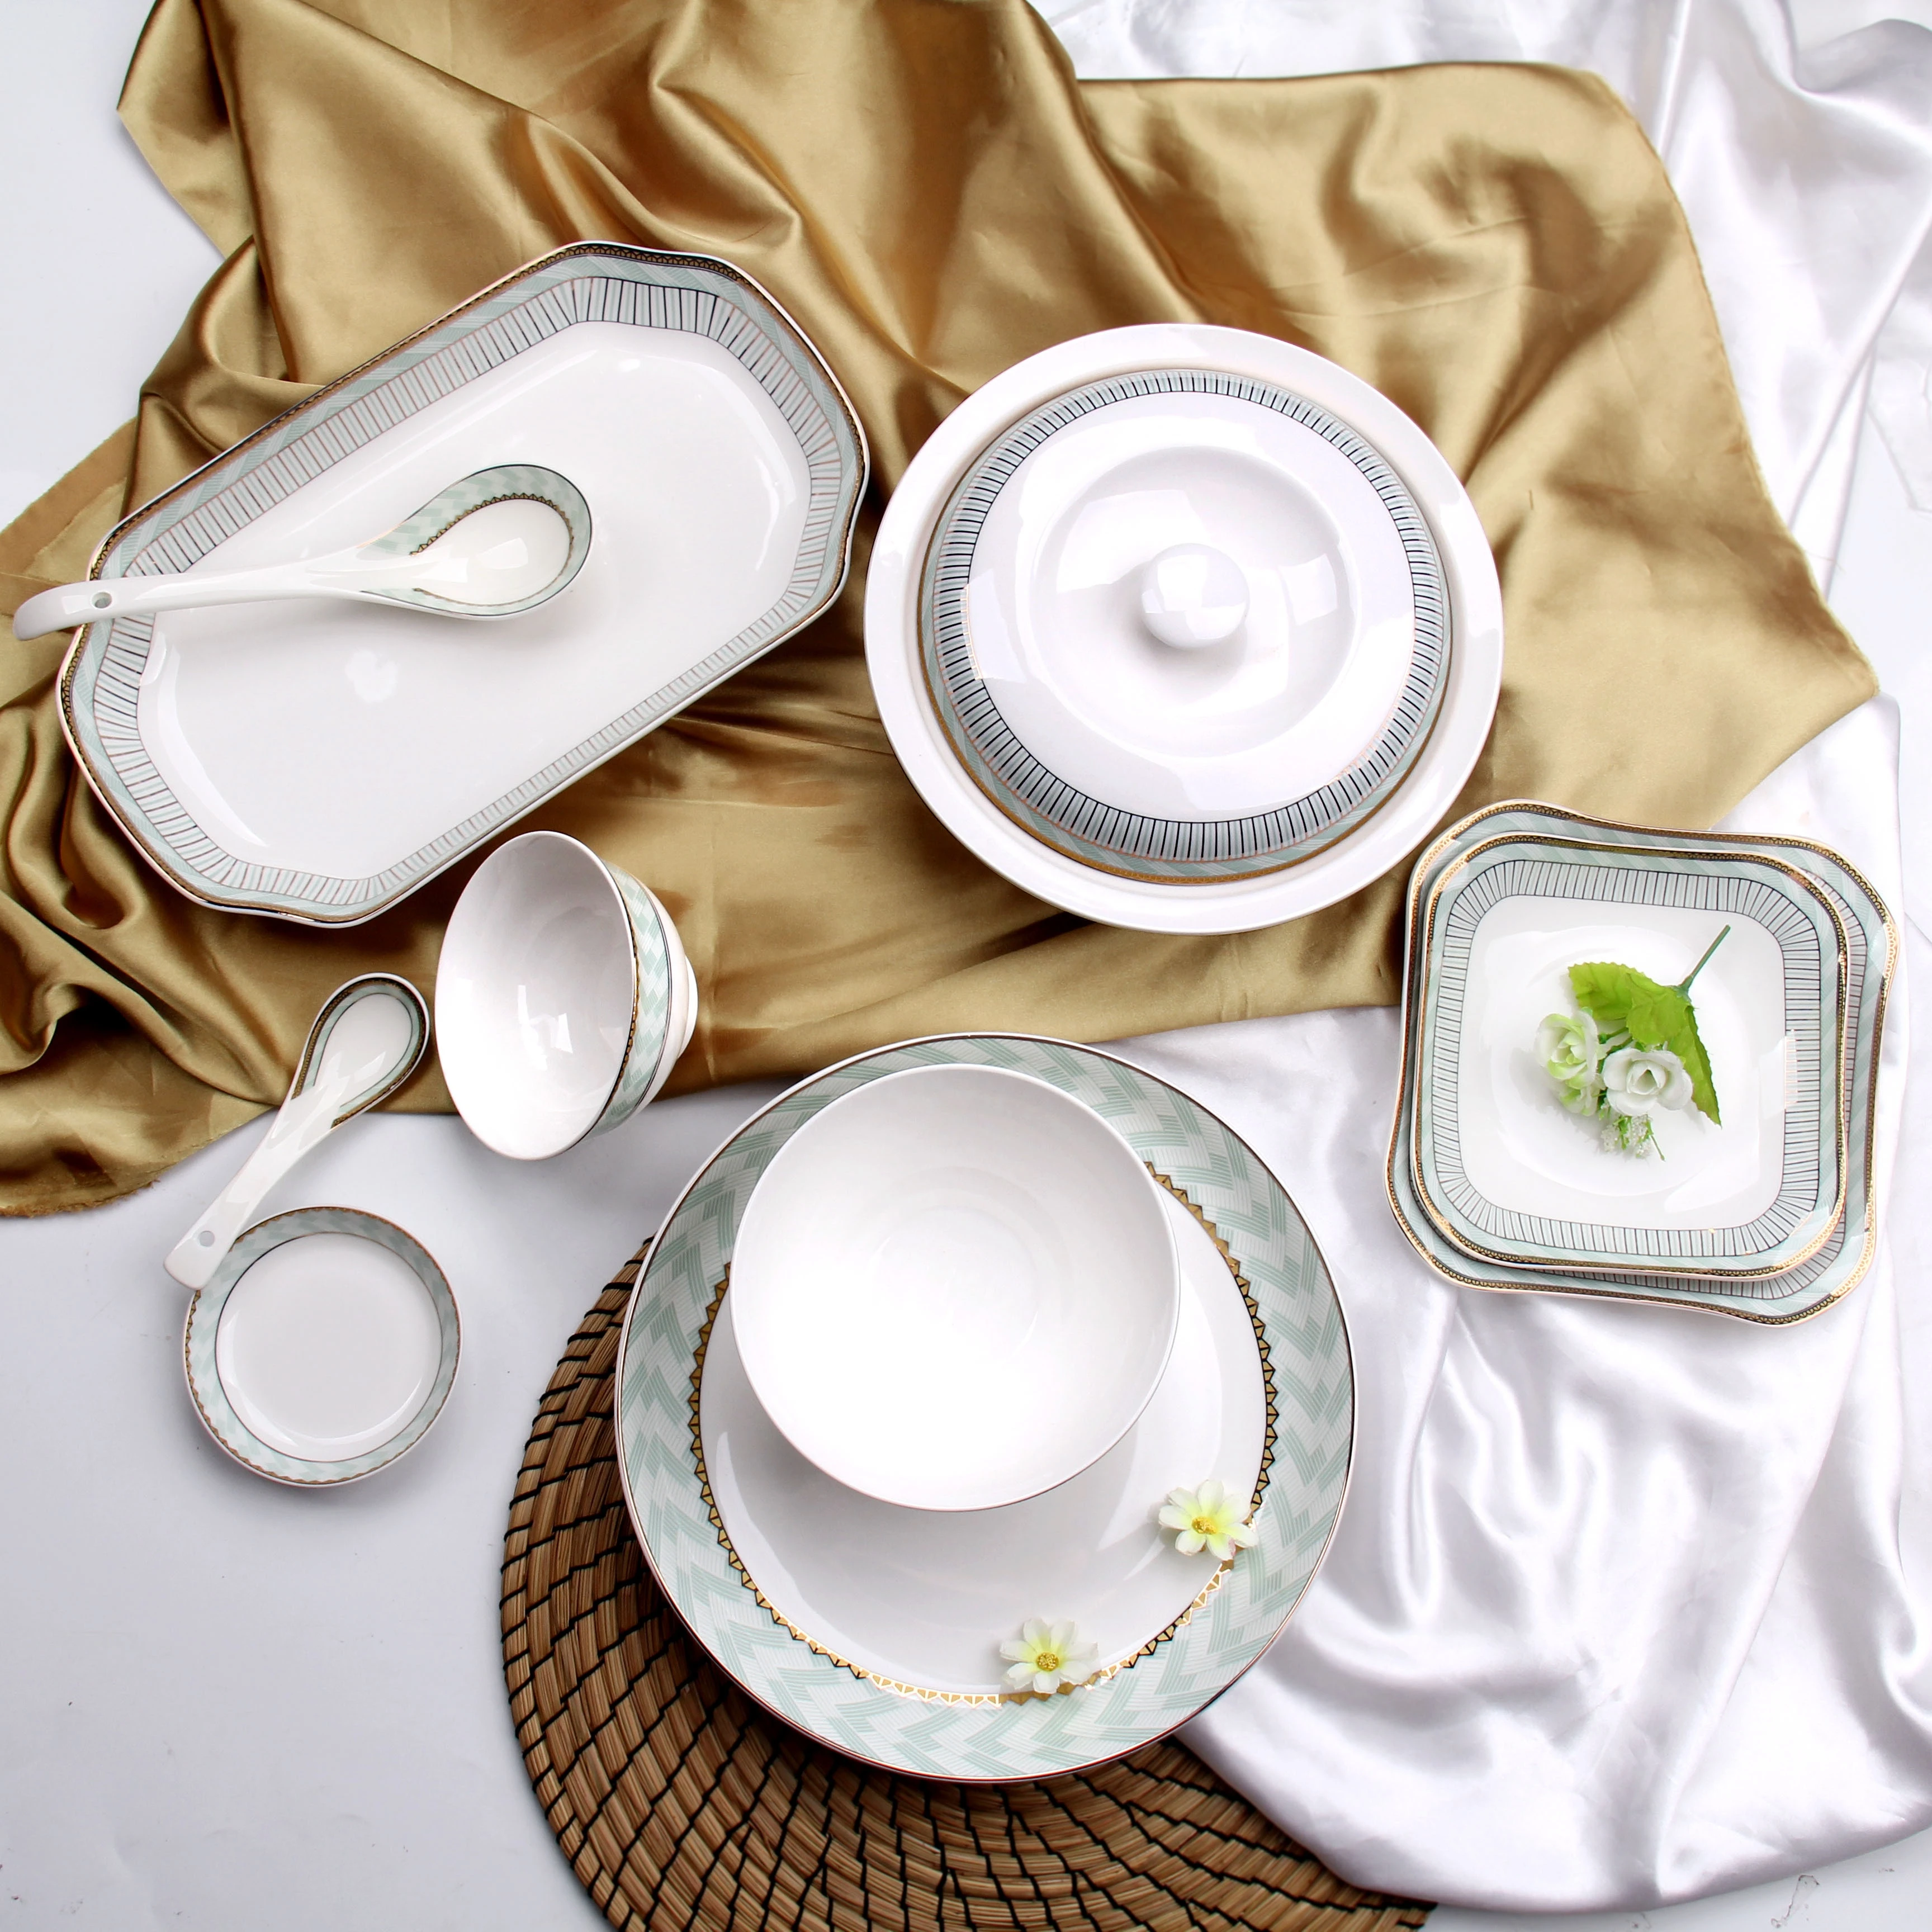 50 pcs luxury   dinner set in stocks in ceramic bowls and plates